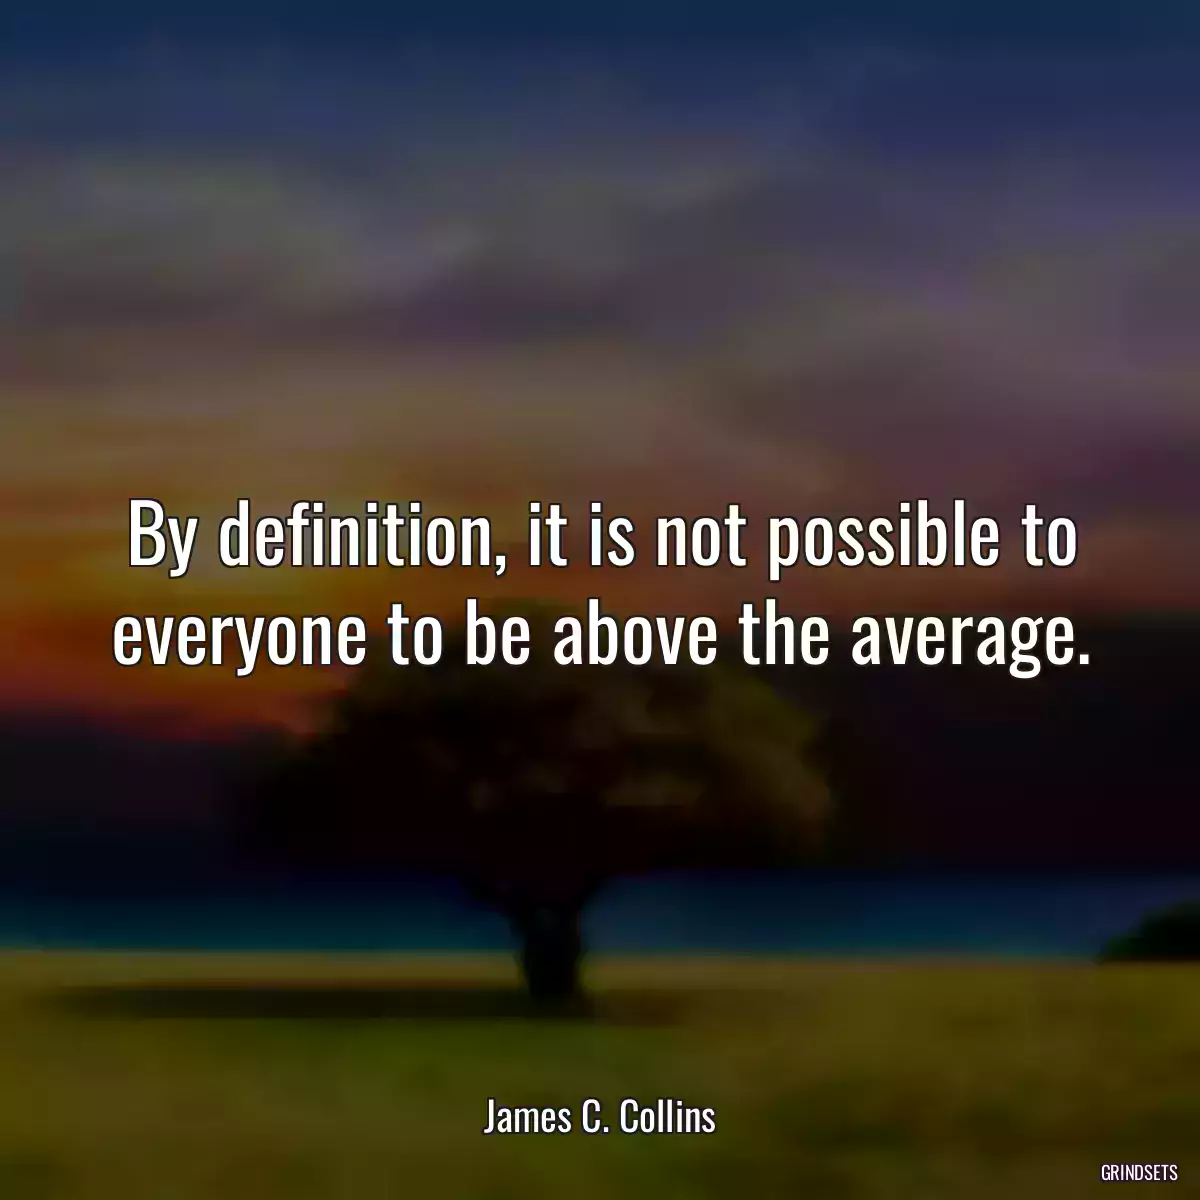 By definition, it is not possible to everyone to be above the average.